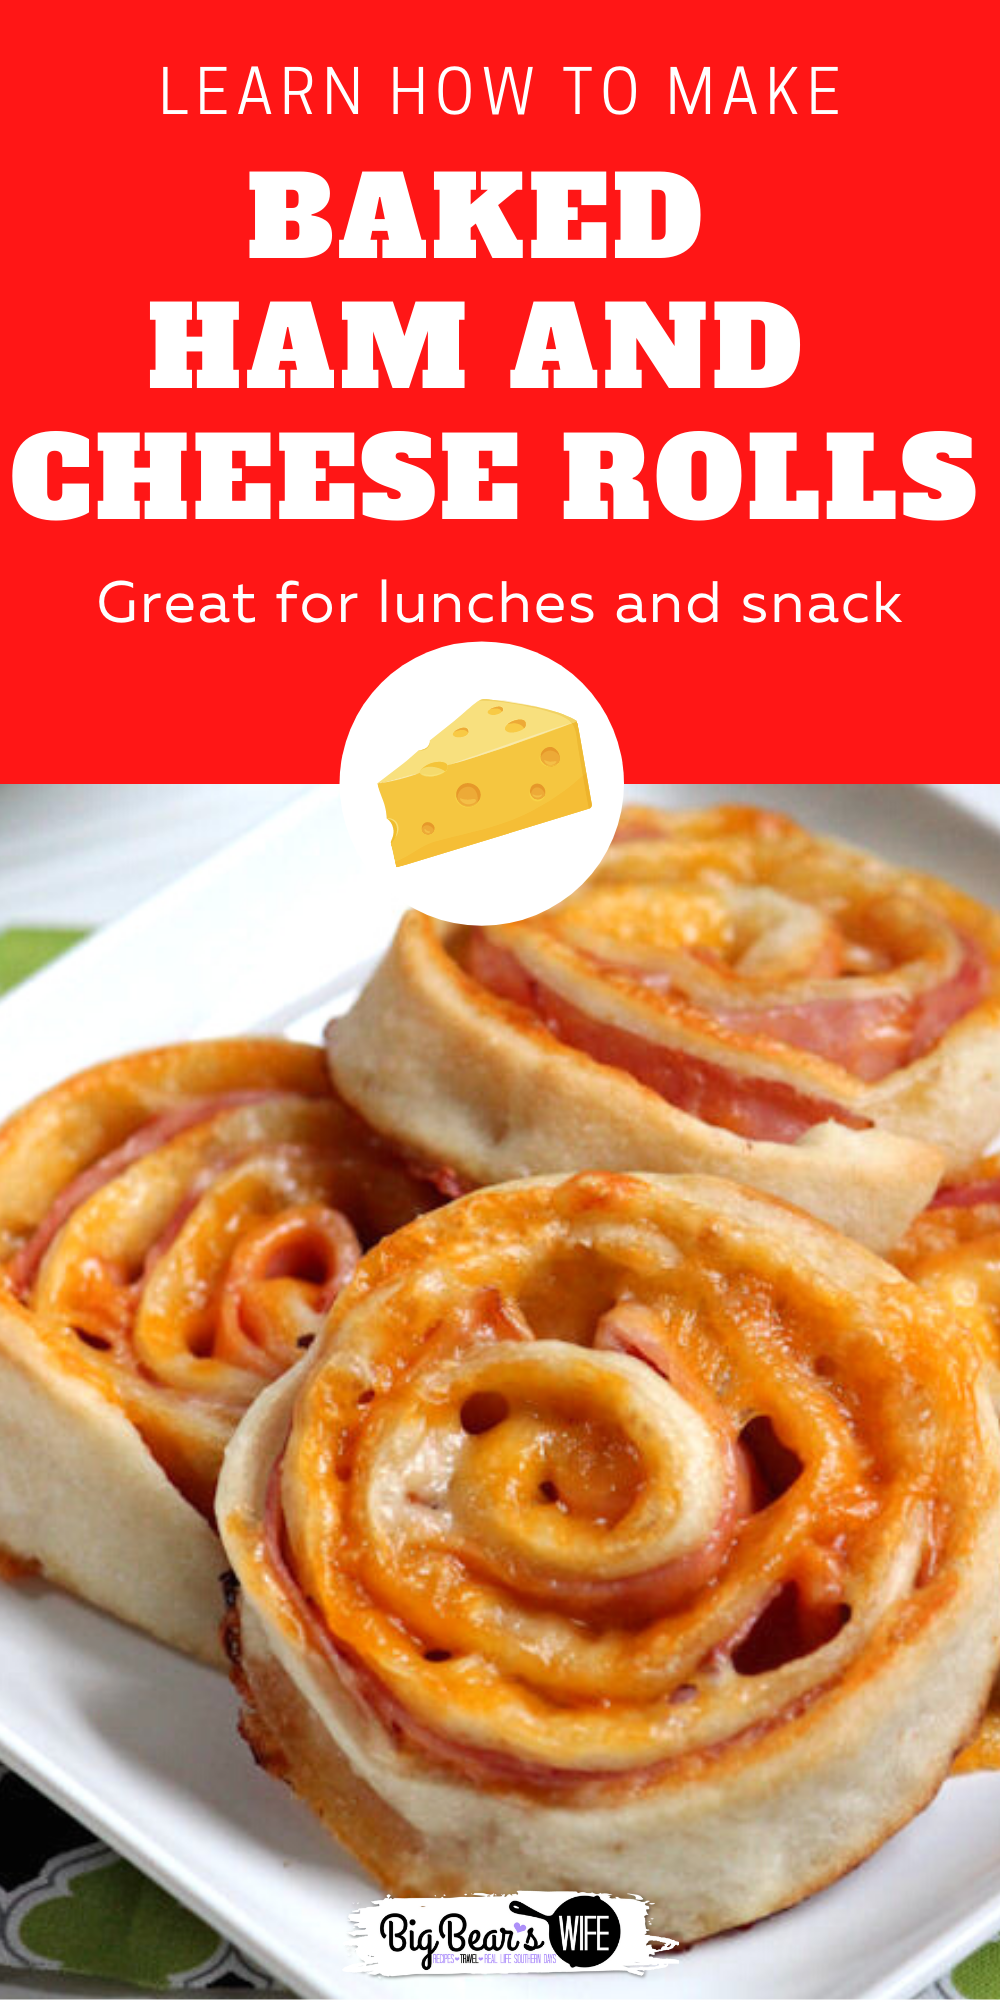  These Baked Ham and Cheese Rolls are perfect for summer lunches and school lunch boxes! They're also perfect to take to work! via @bigbearswife